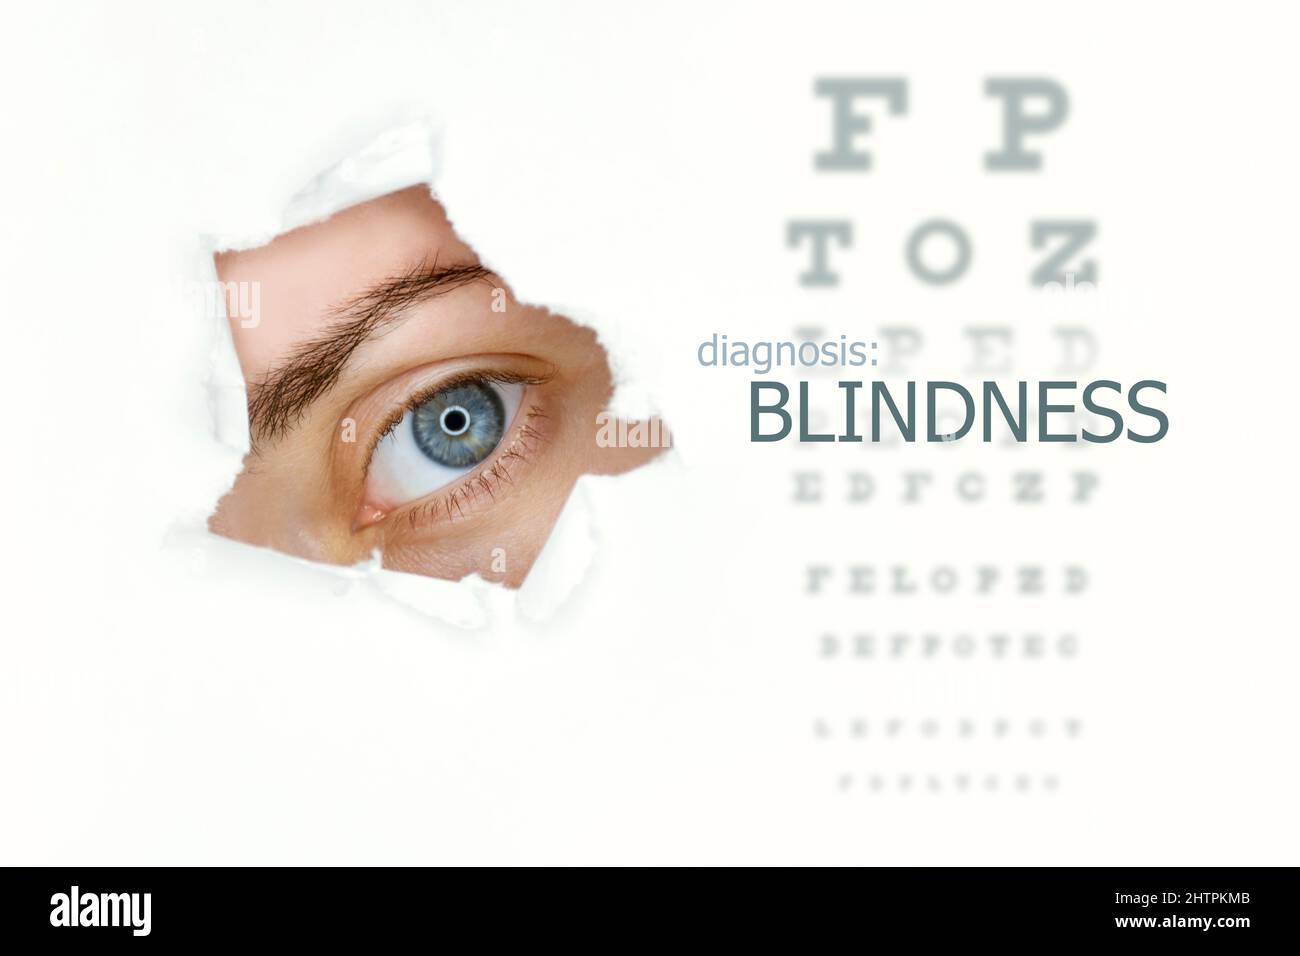 Blindness disease poster wwith eye test chart and blue eye on left. Isolated on white Stock Photo